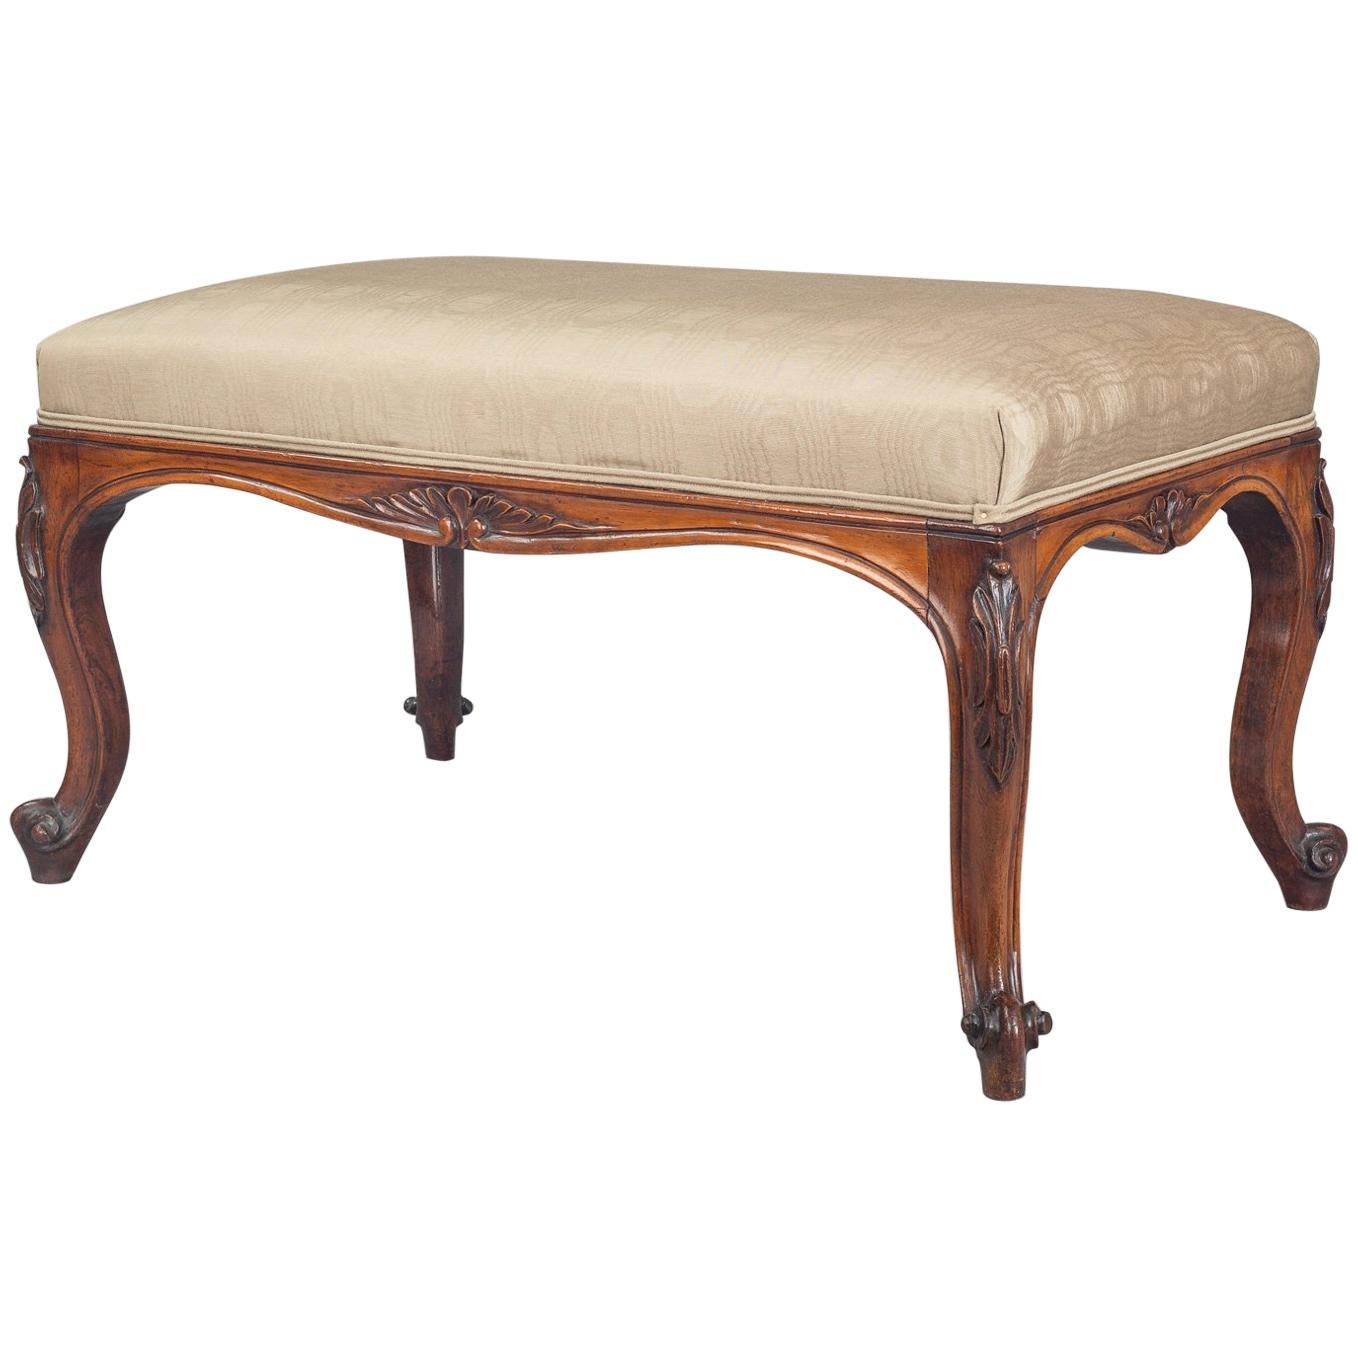 English Antique William IV Carved Rosewood Bench, circa 1840 For Sale